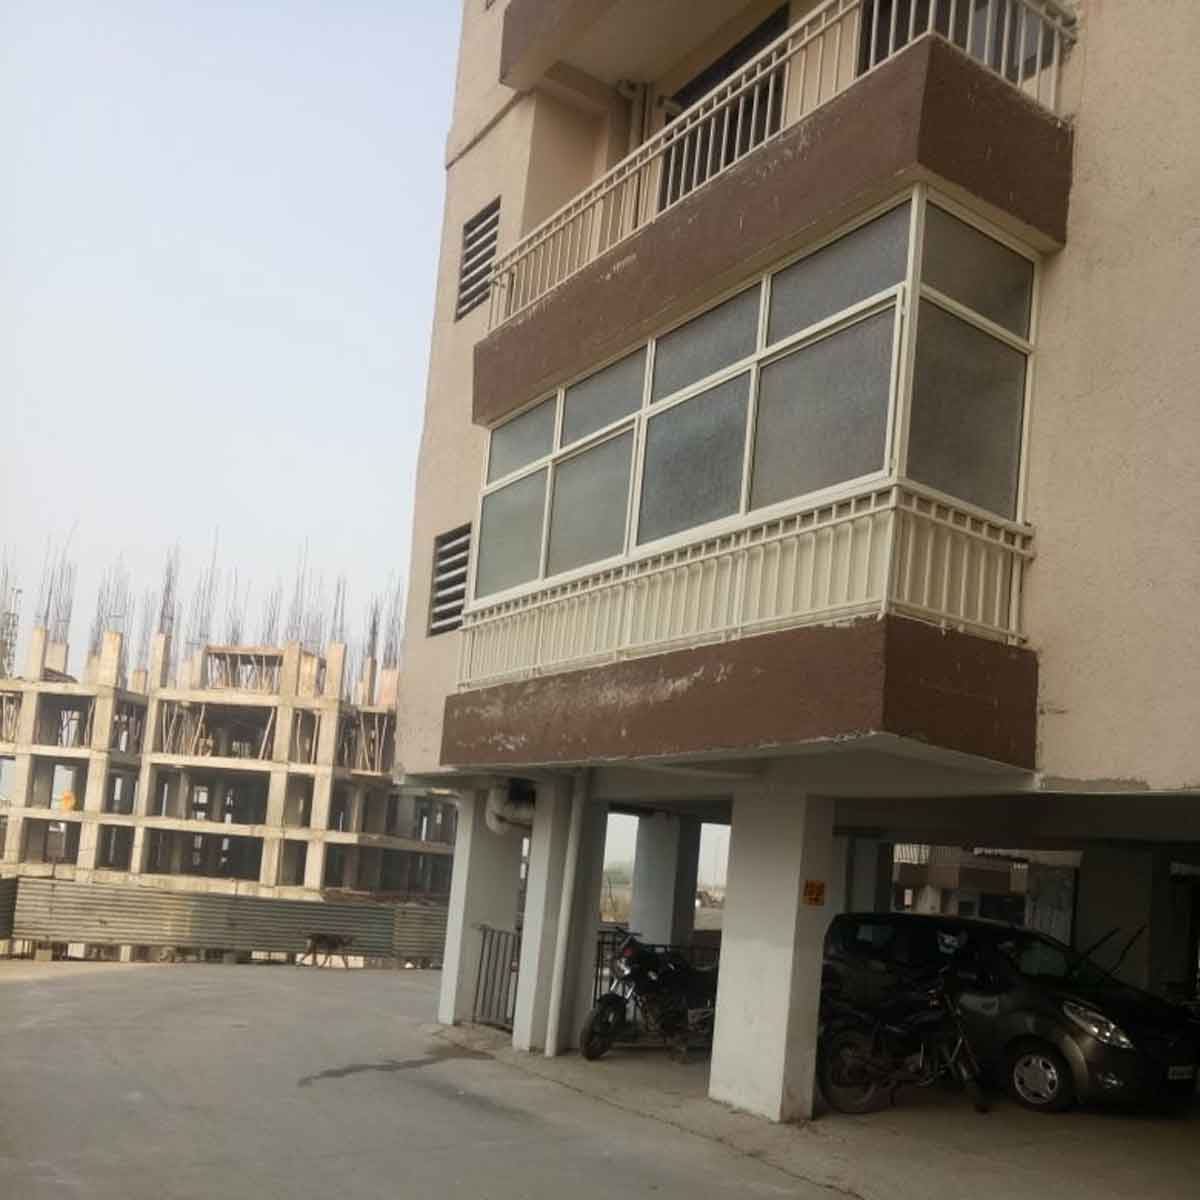 UPVC Aluminium Balcony Covering Manufacturers, Suppliers in Dholpur